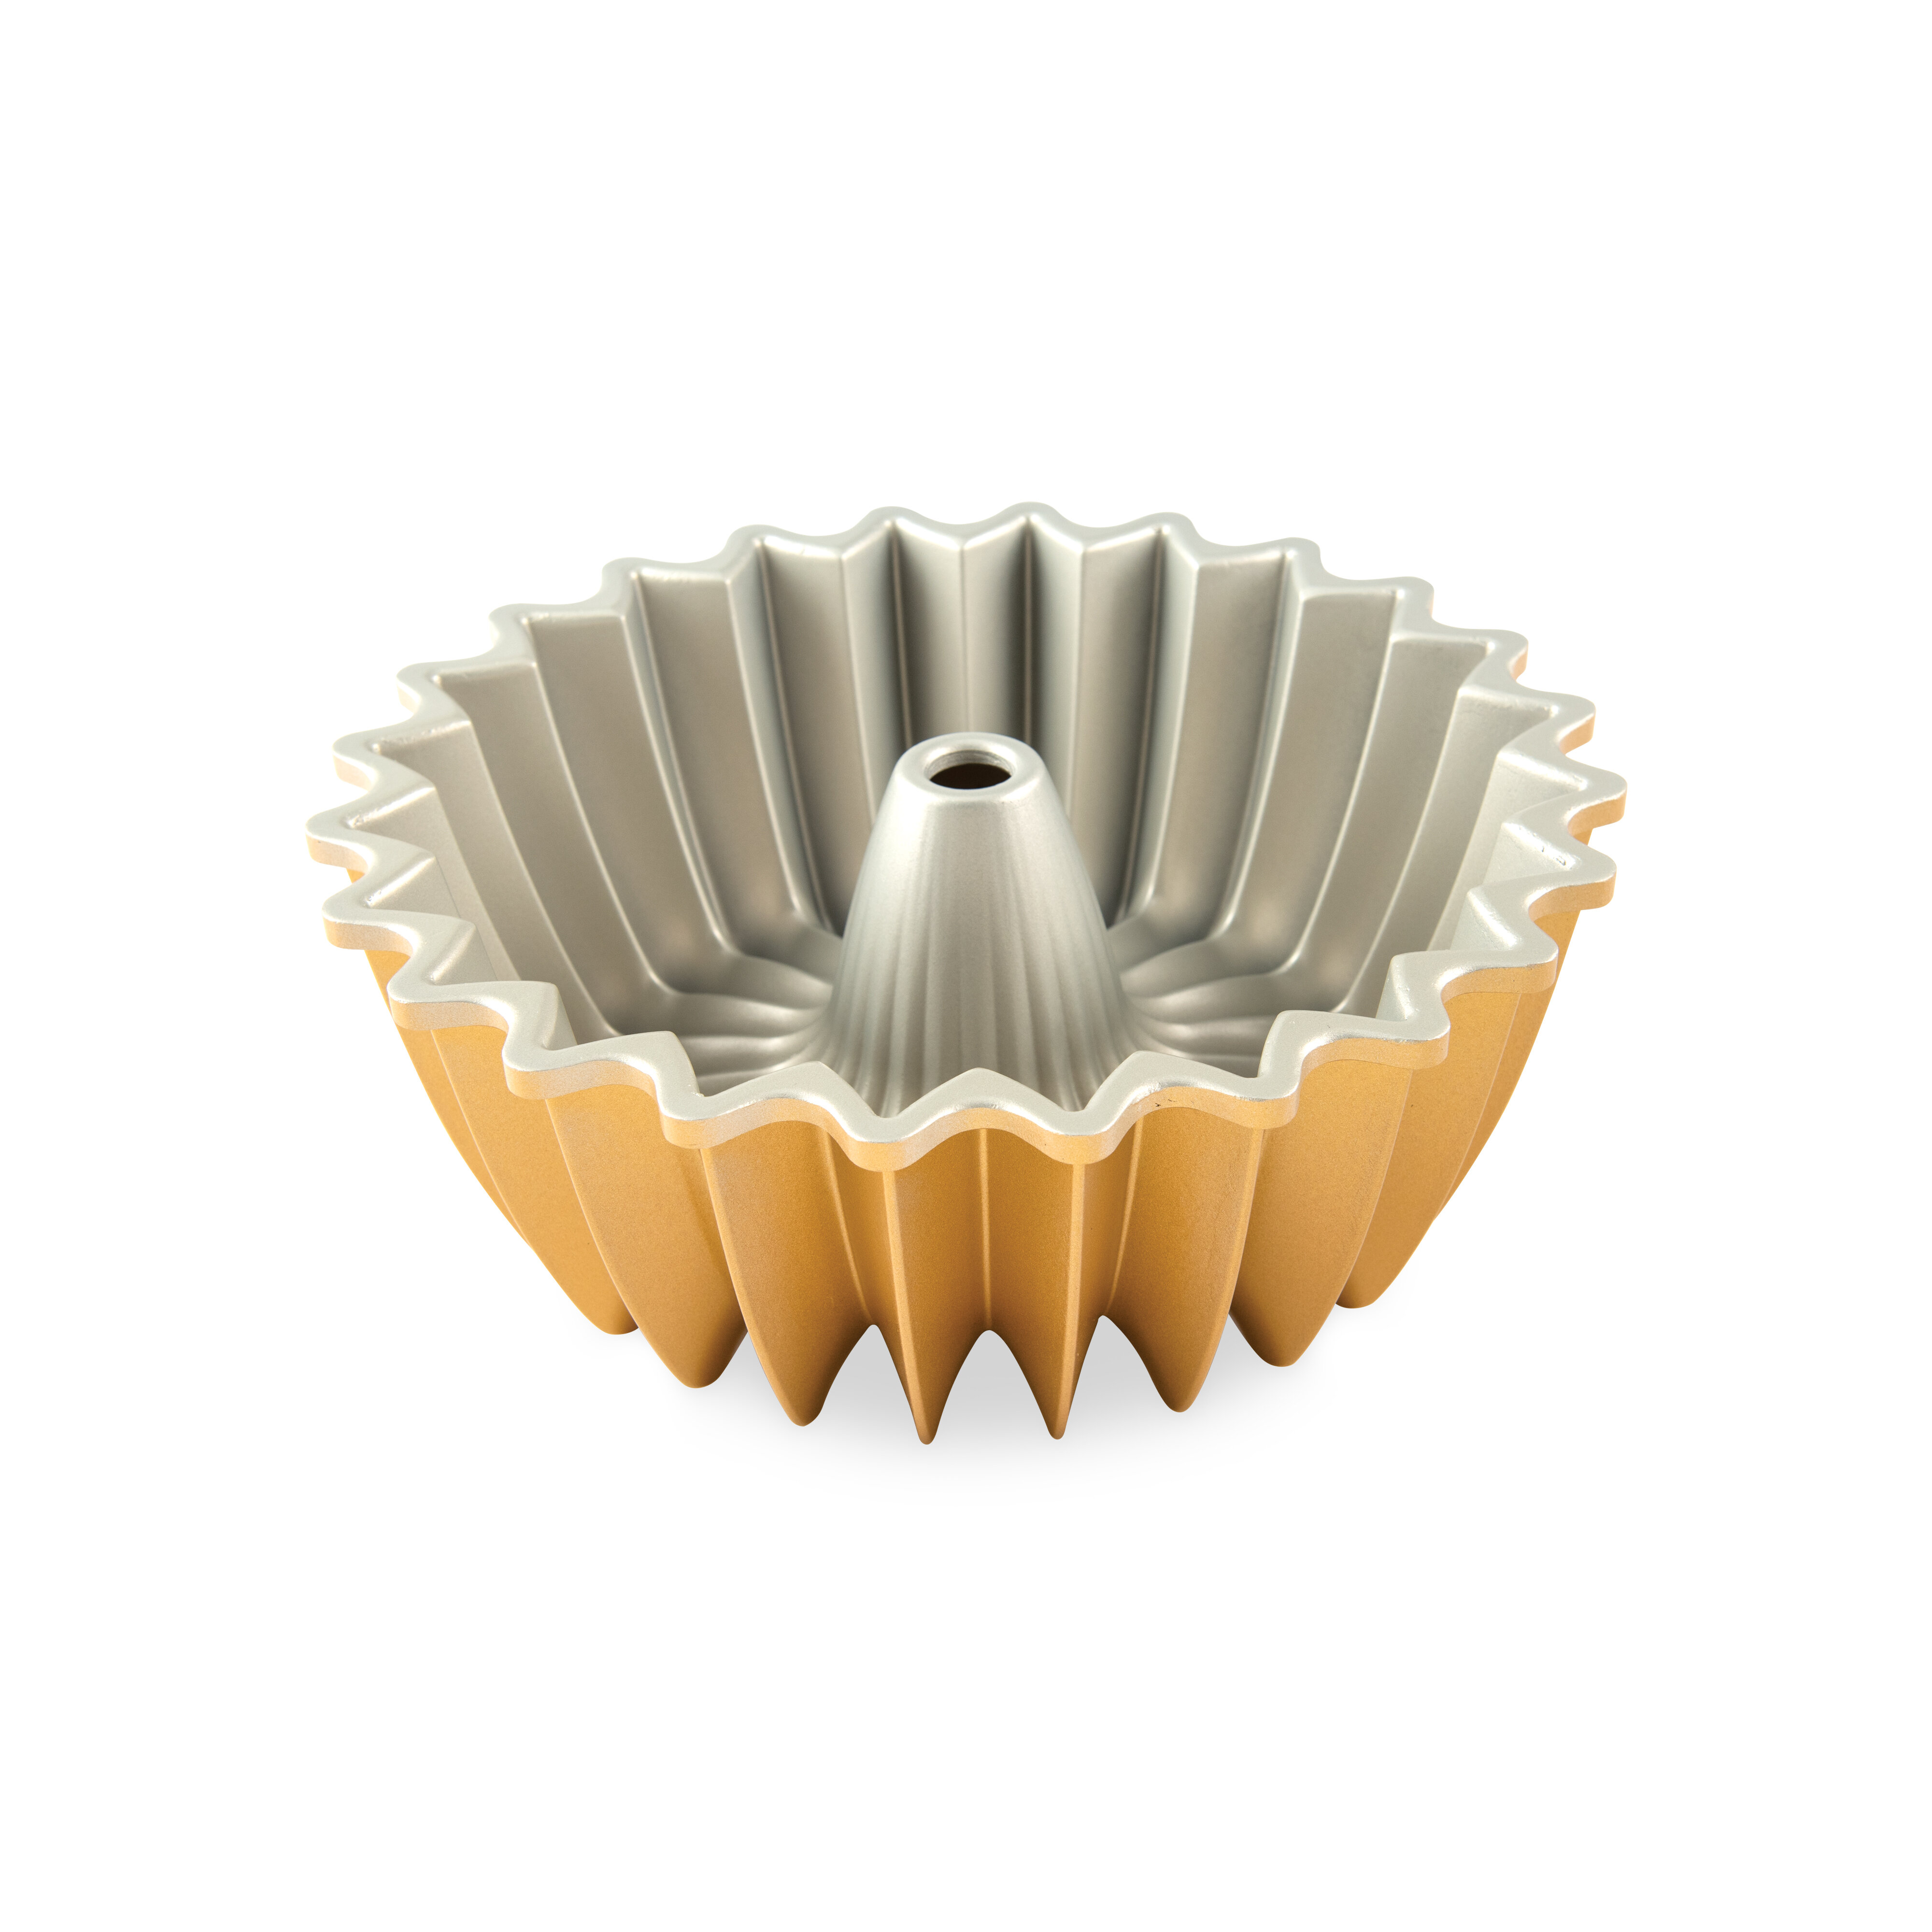 Nordic Ware 5 cup brilliance bundt baking tin from Nordic Ware